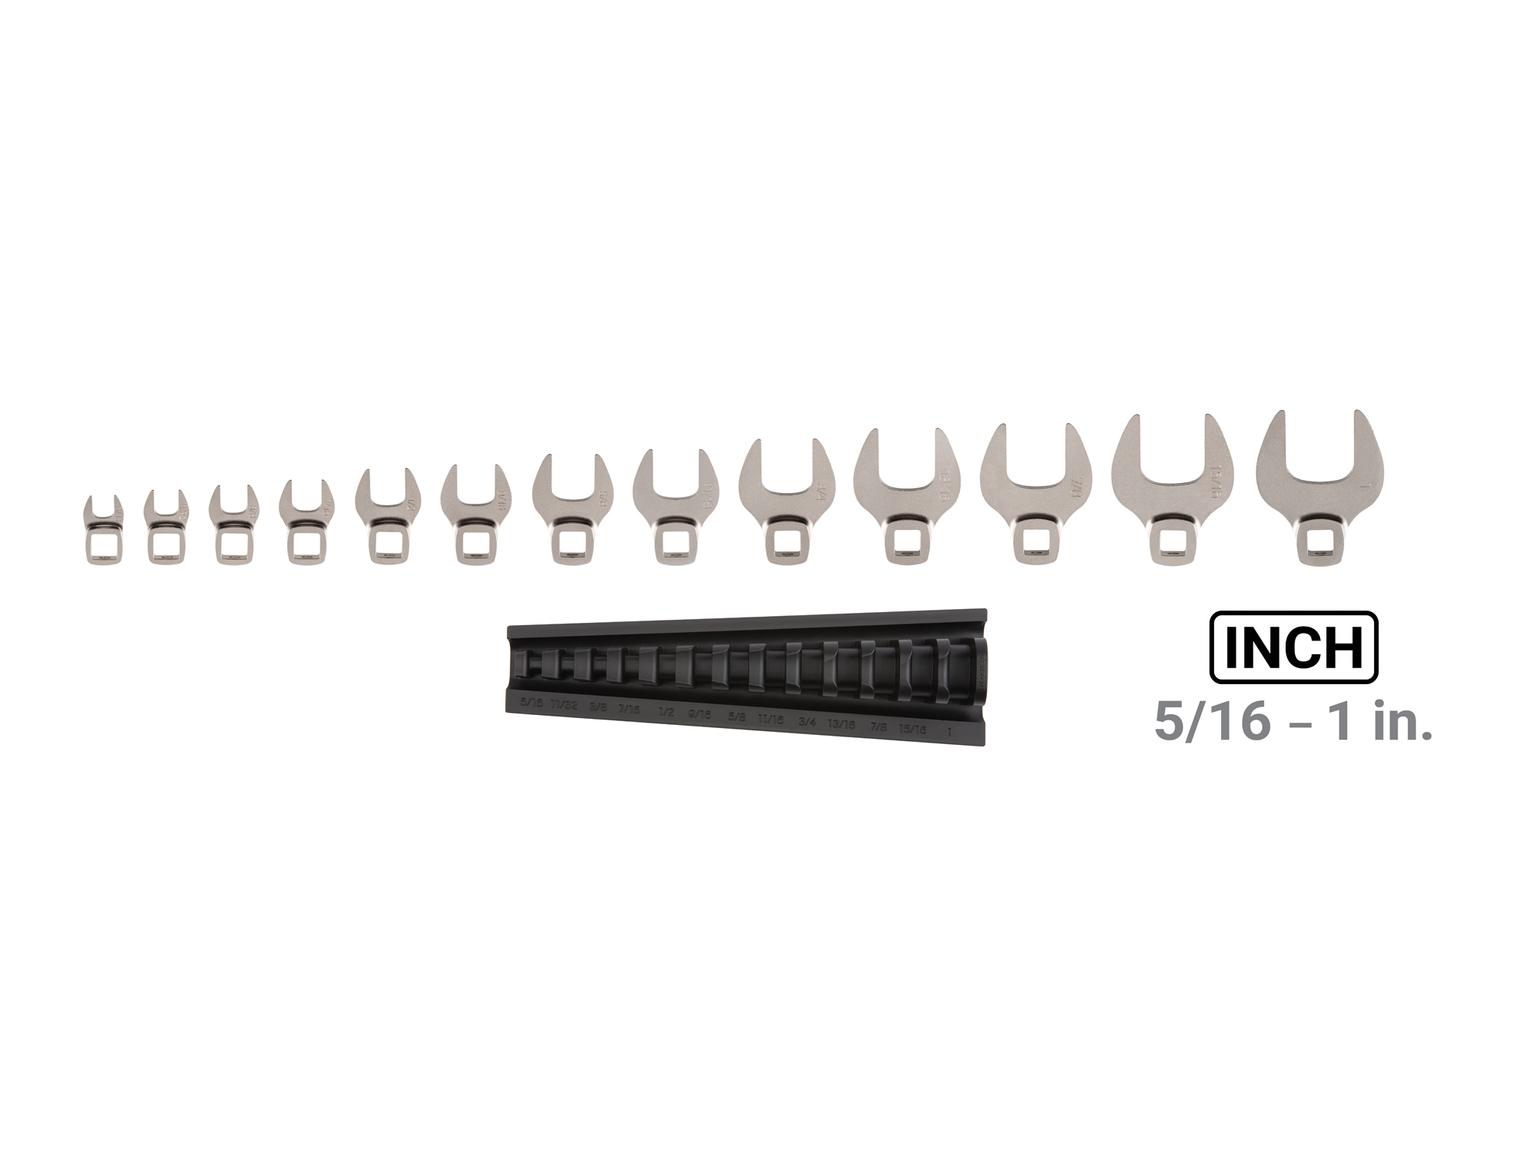 TEKTON WCF95101-T 3/8 Inch Drive Crowfoot Wrench Set with Rack, 13-Piece (5/16-1 in.)